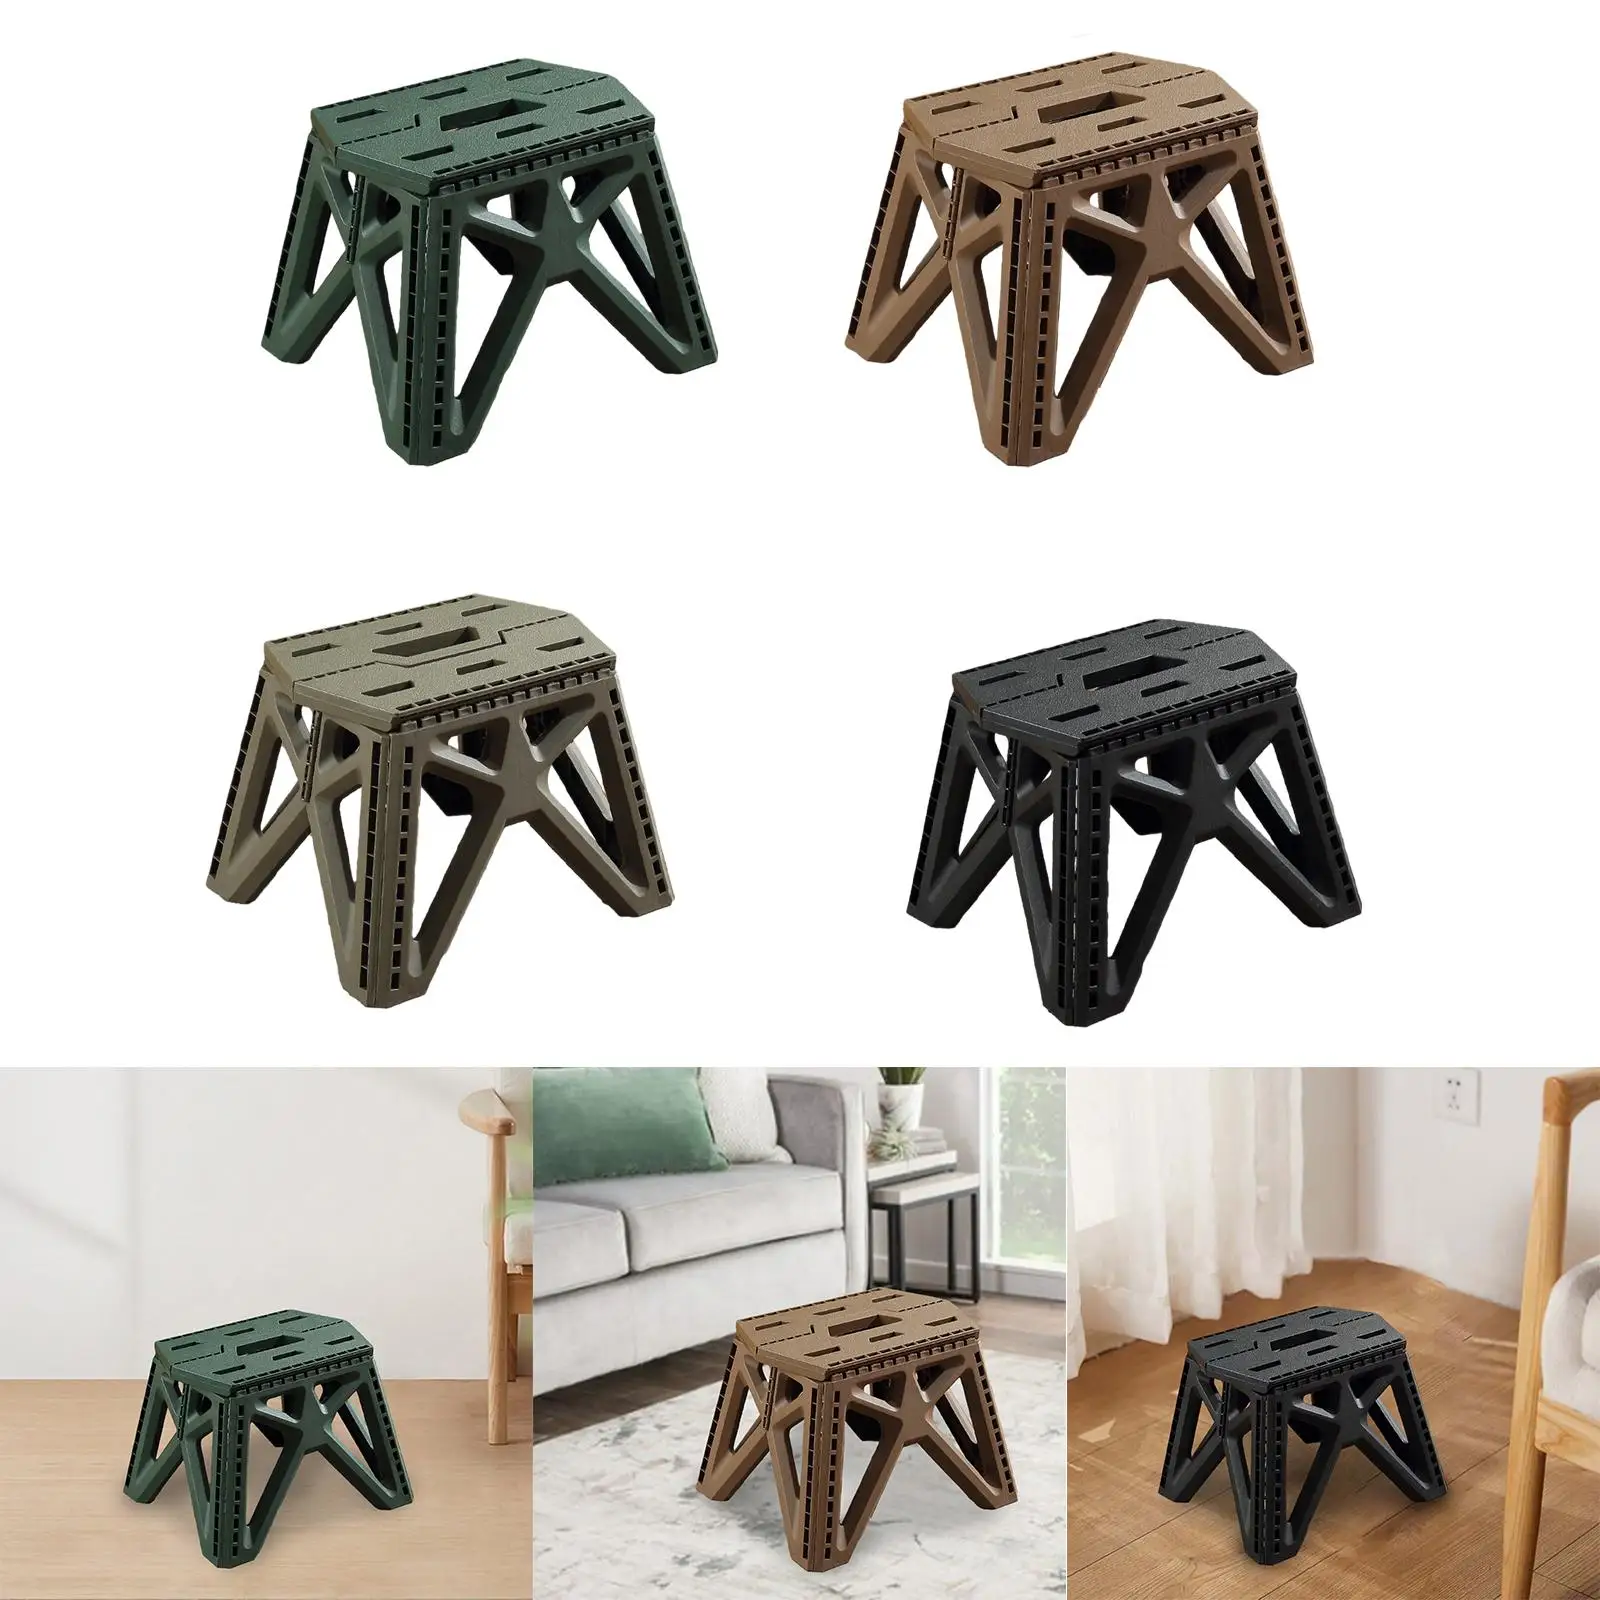 Foldable Camping Stool Collapsible Stool Lightweight Furniture Outside Foldable Stool Chair for Picnic BBQ Backyard Patio Yard